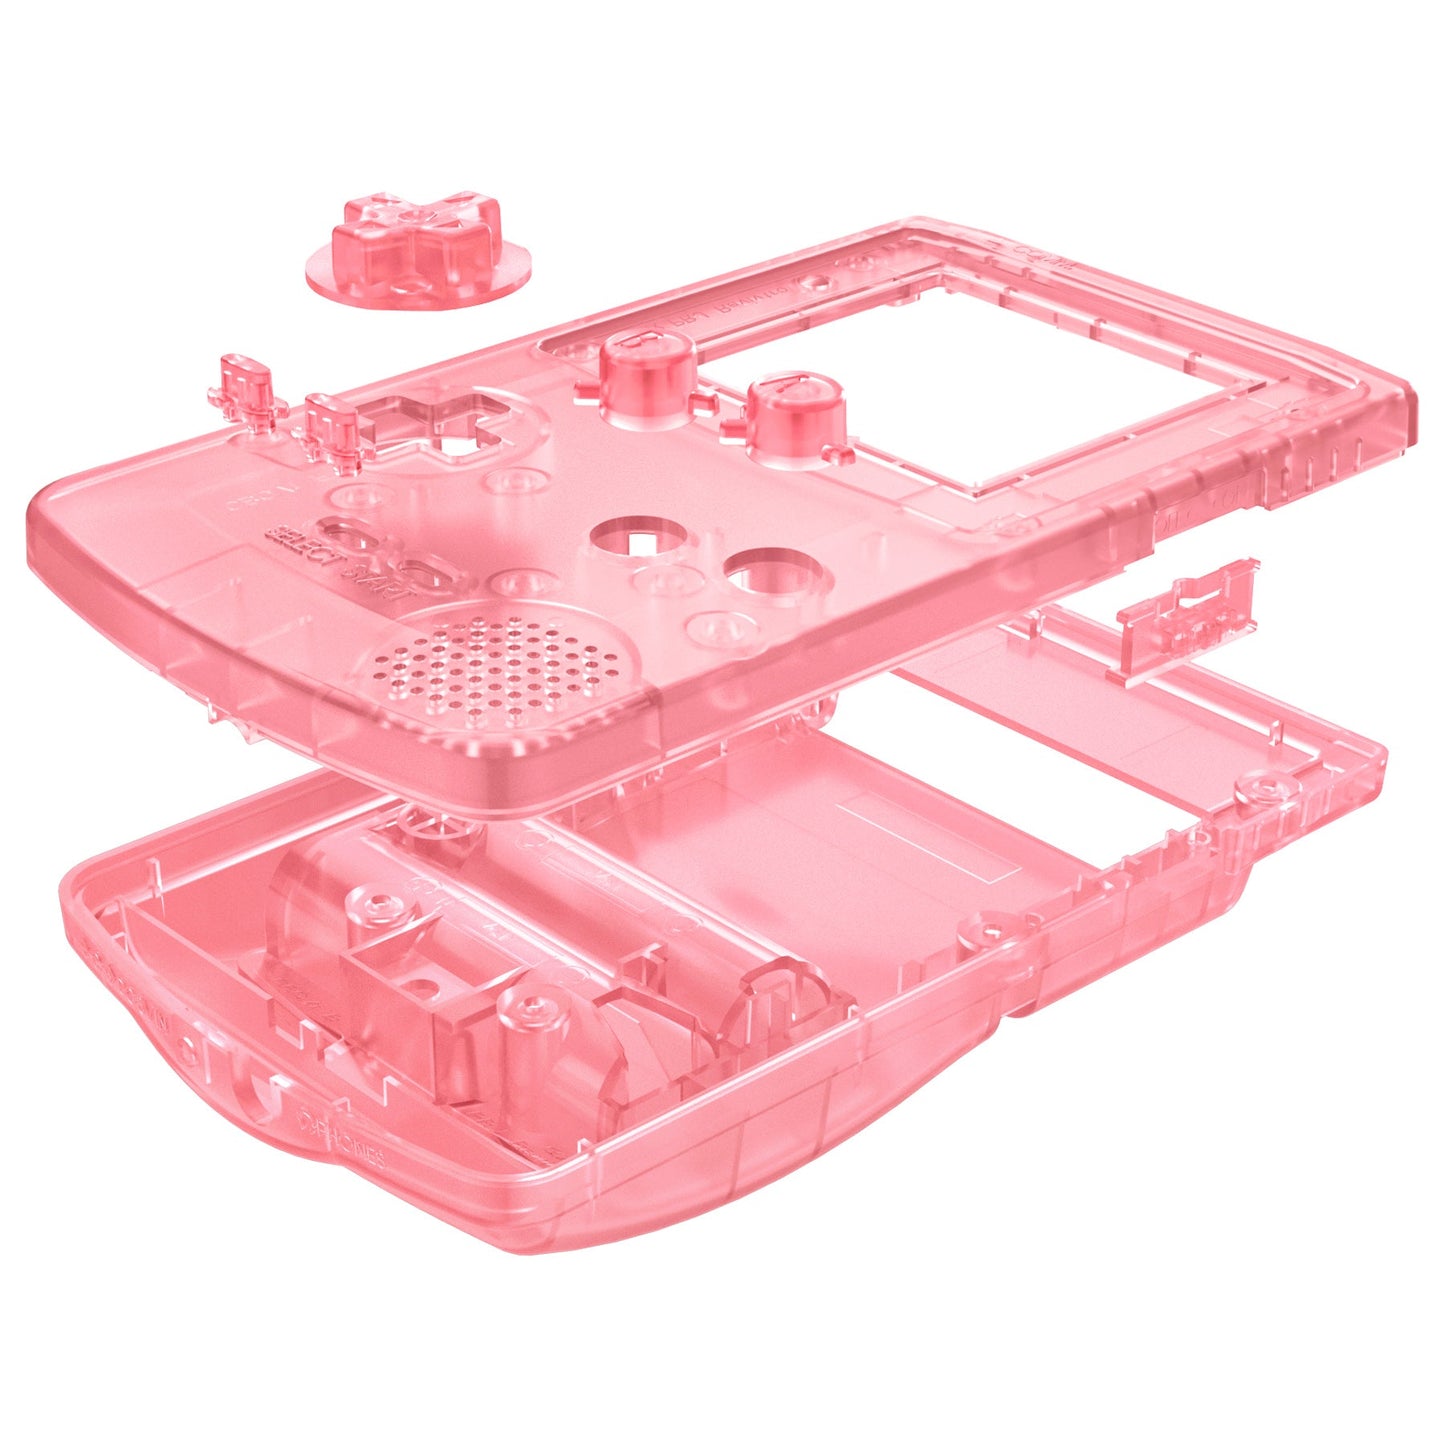 eXtremeRate Retail IPS Ready Upgraded eXtremeRate Cherry Pink Replacement Shell Full Housing Cover & Buttons for Gameboy Color - Fit for GBC OSD IPS & Regular IPS & Standard LCD - Console & IPS Screen NOT Included - QCBM5007